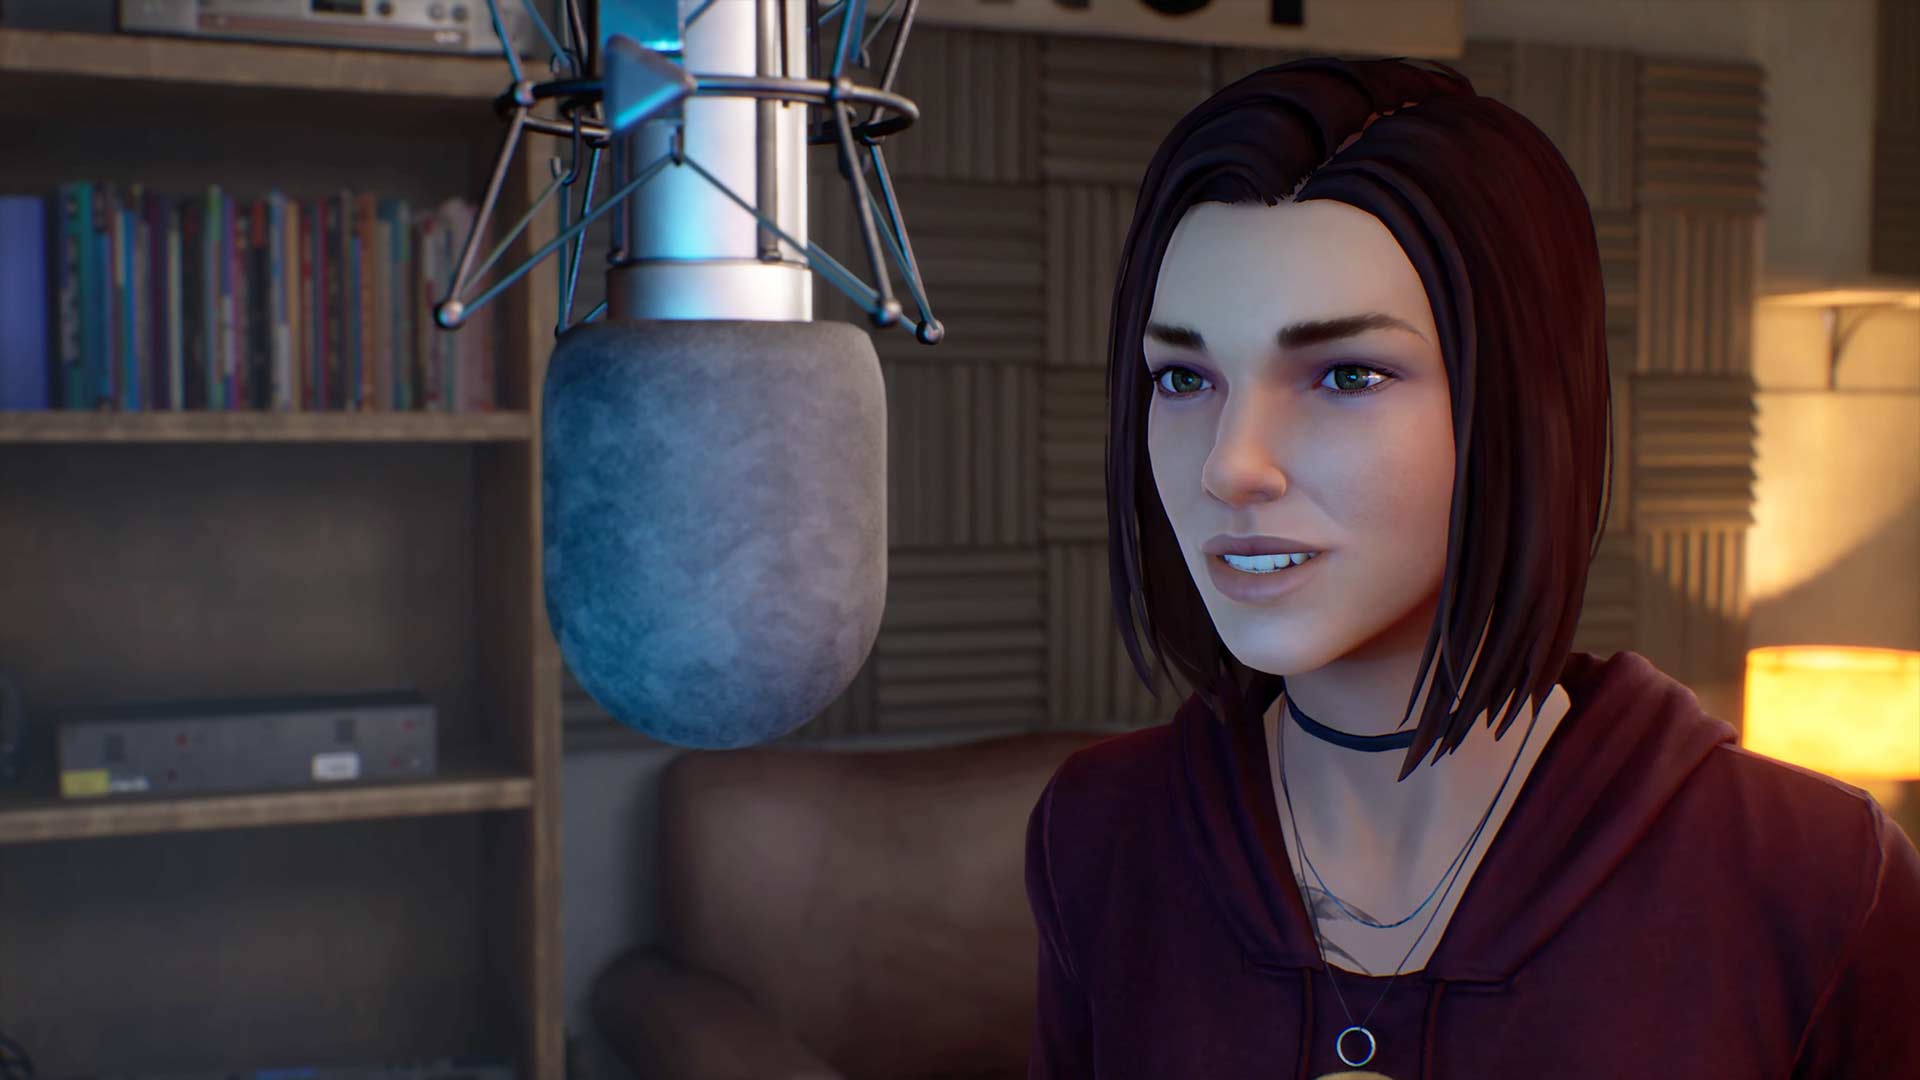 free download life is strange true colours